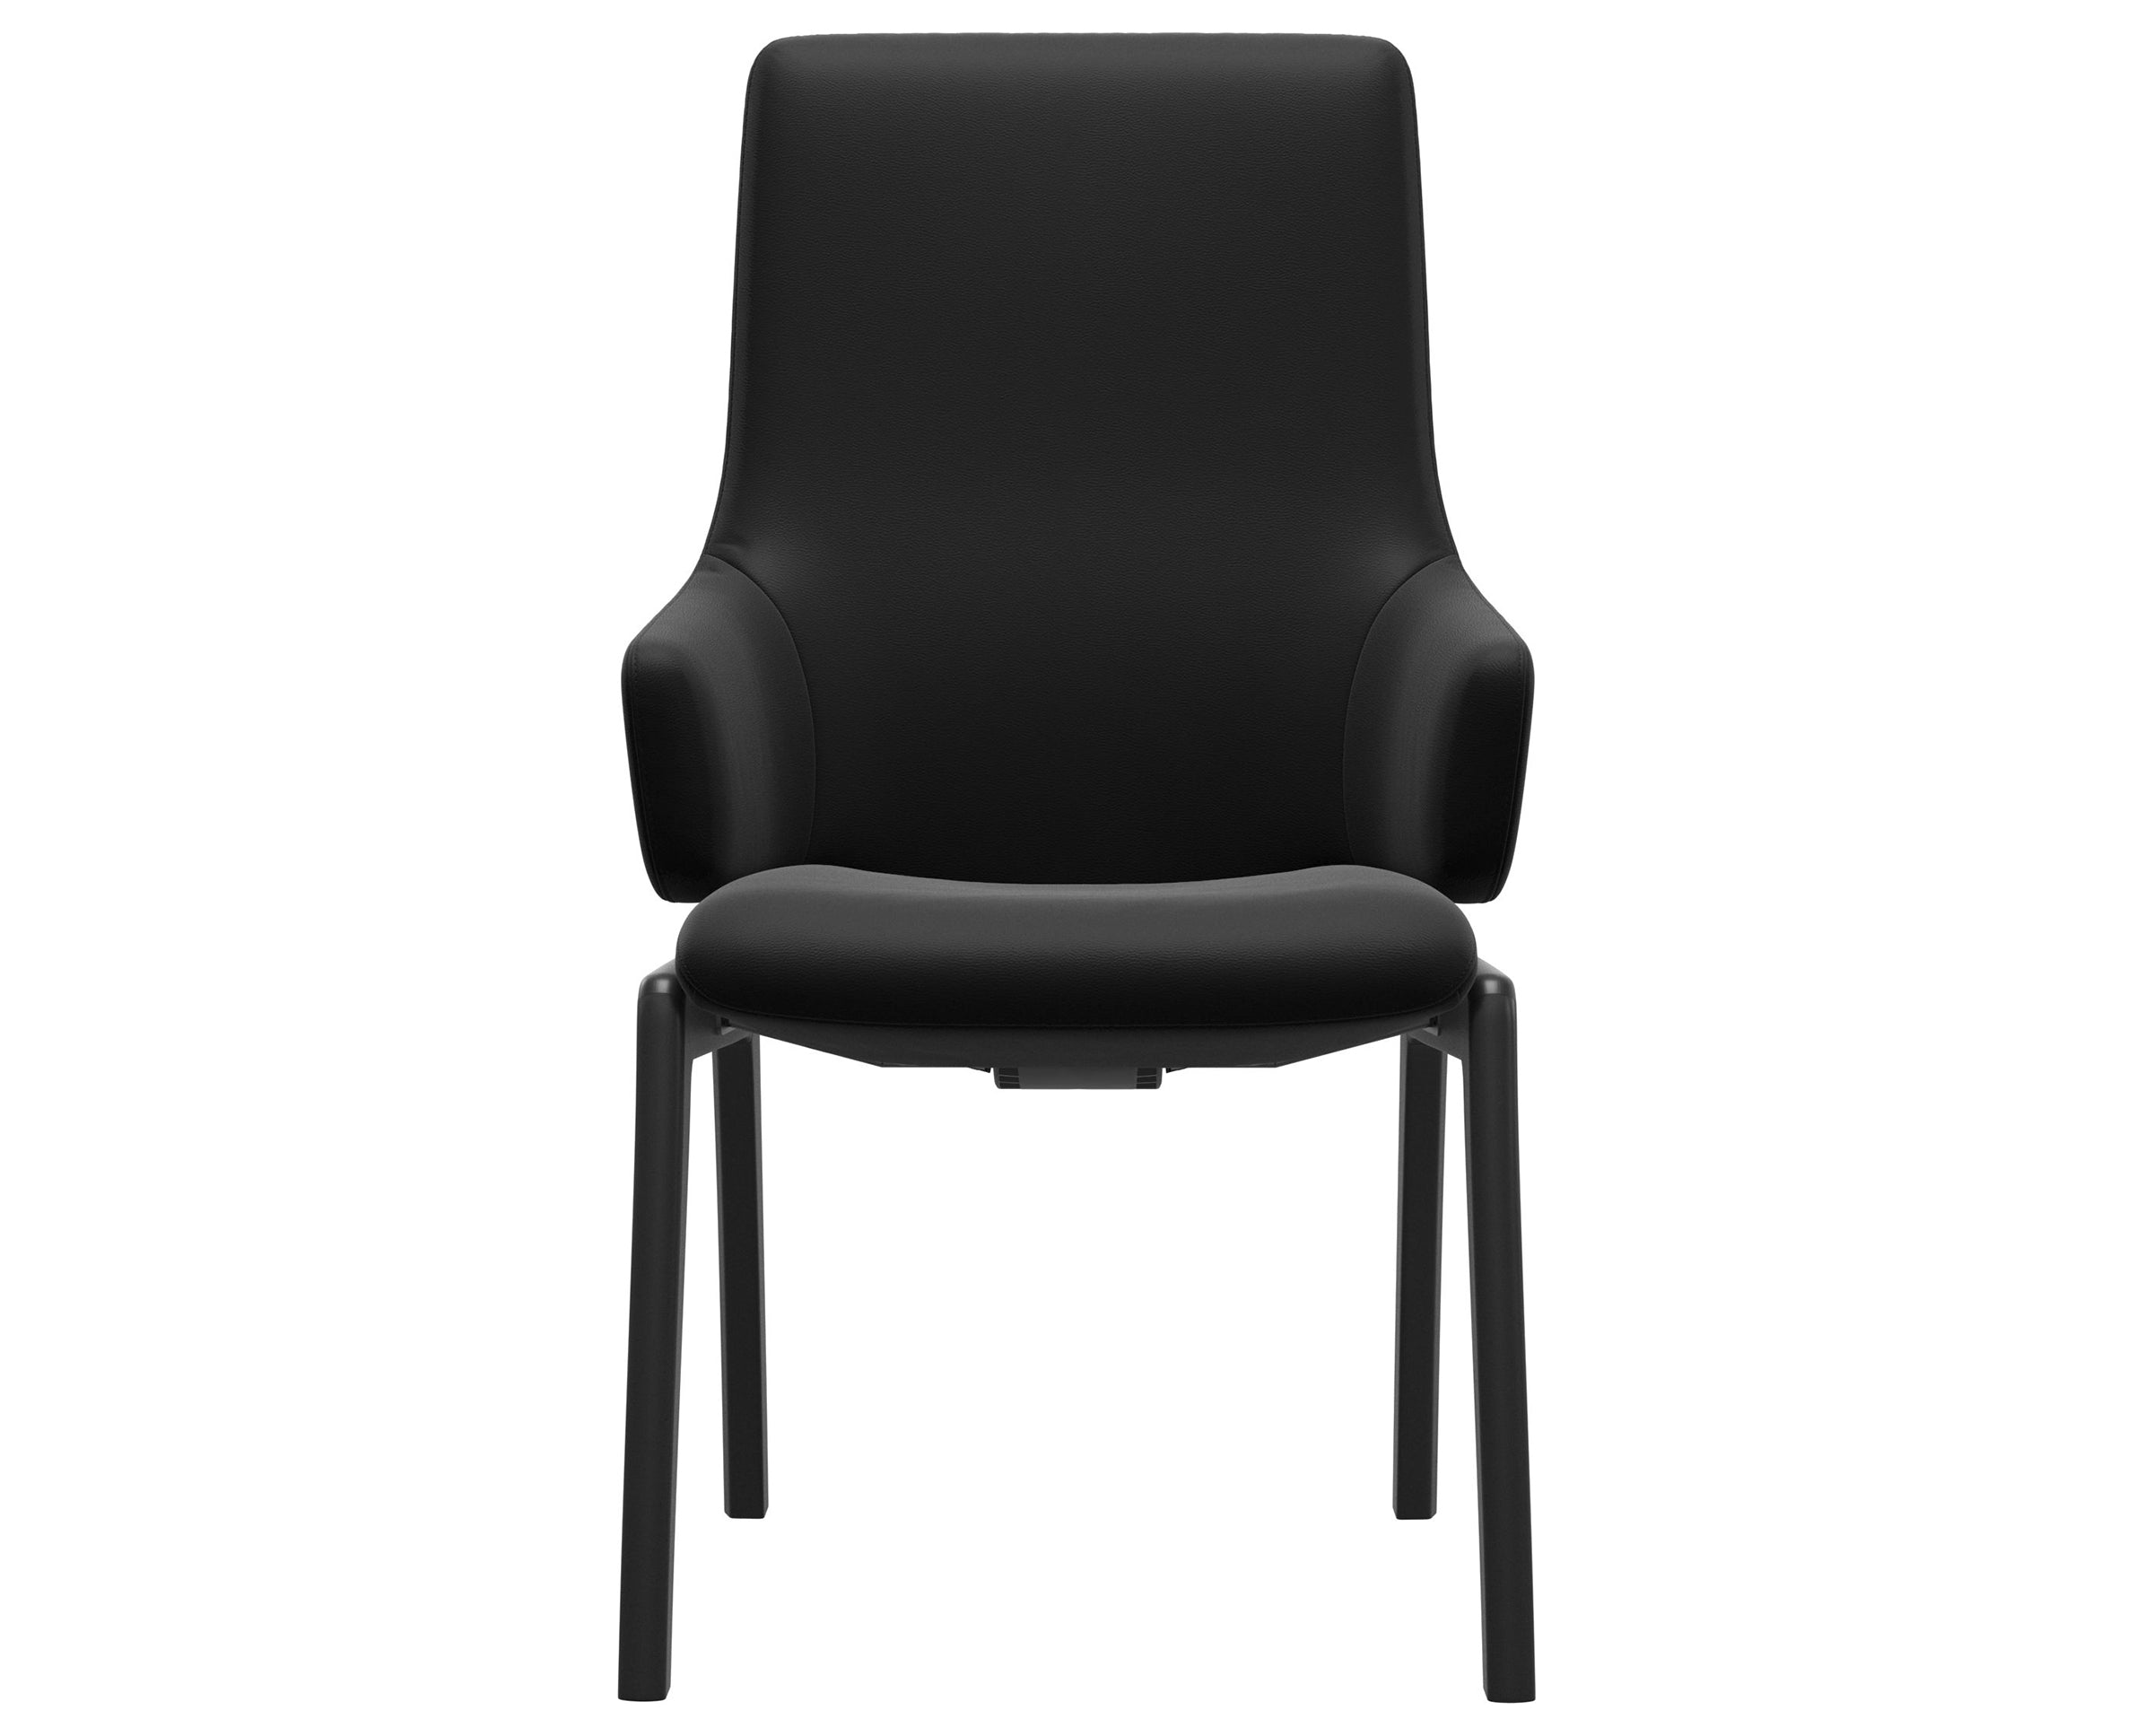 Paloma Leather Black and Black Base | Stressless Laurel High Back D100 Dining Chair w/Arms | Valley Ridge Furniture